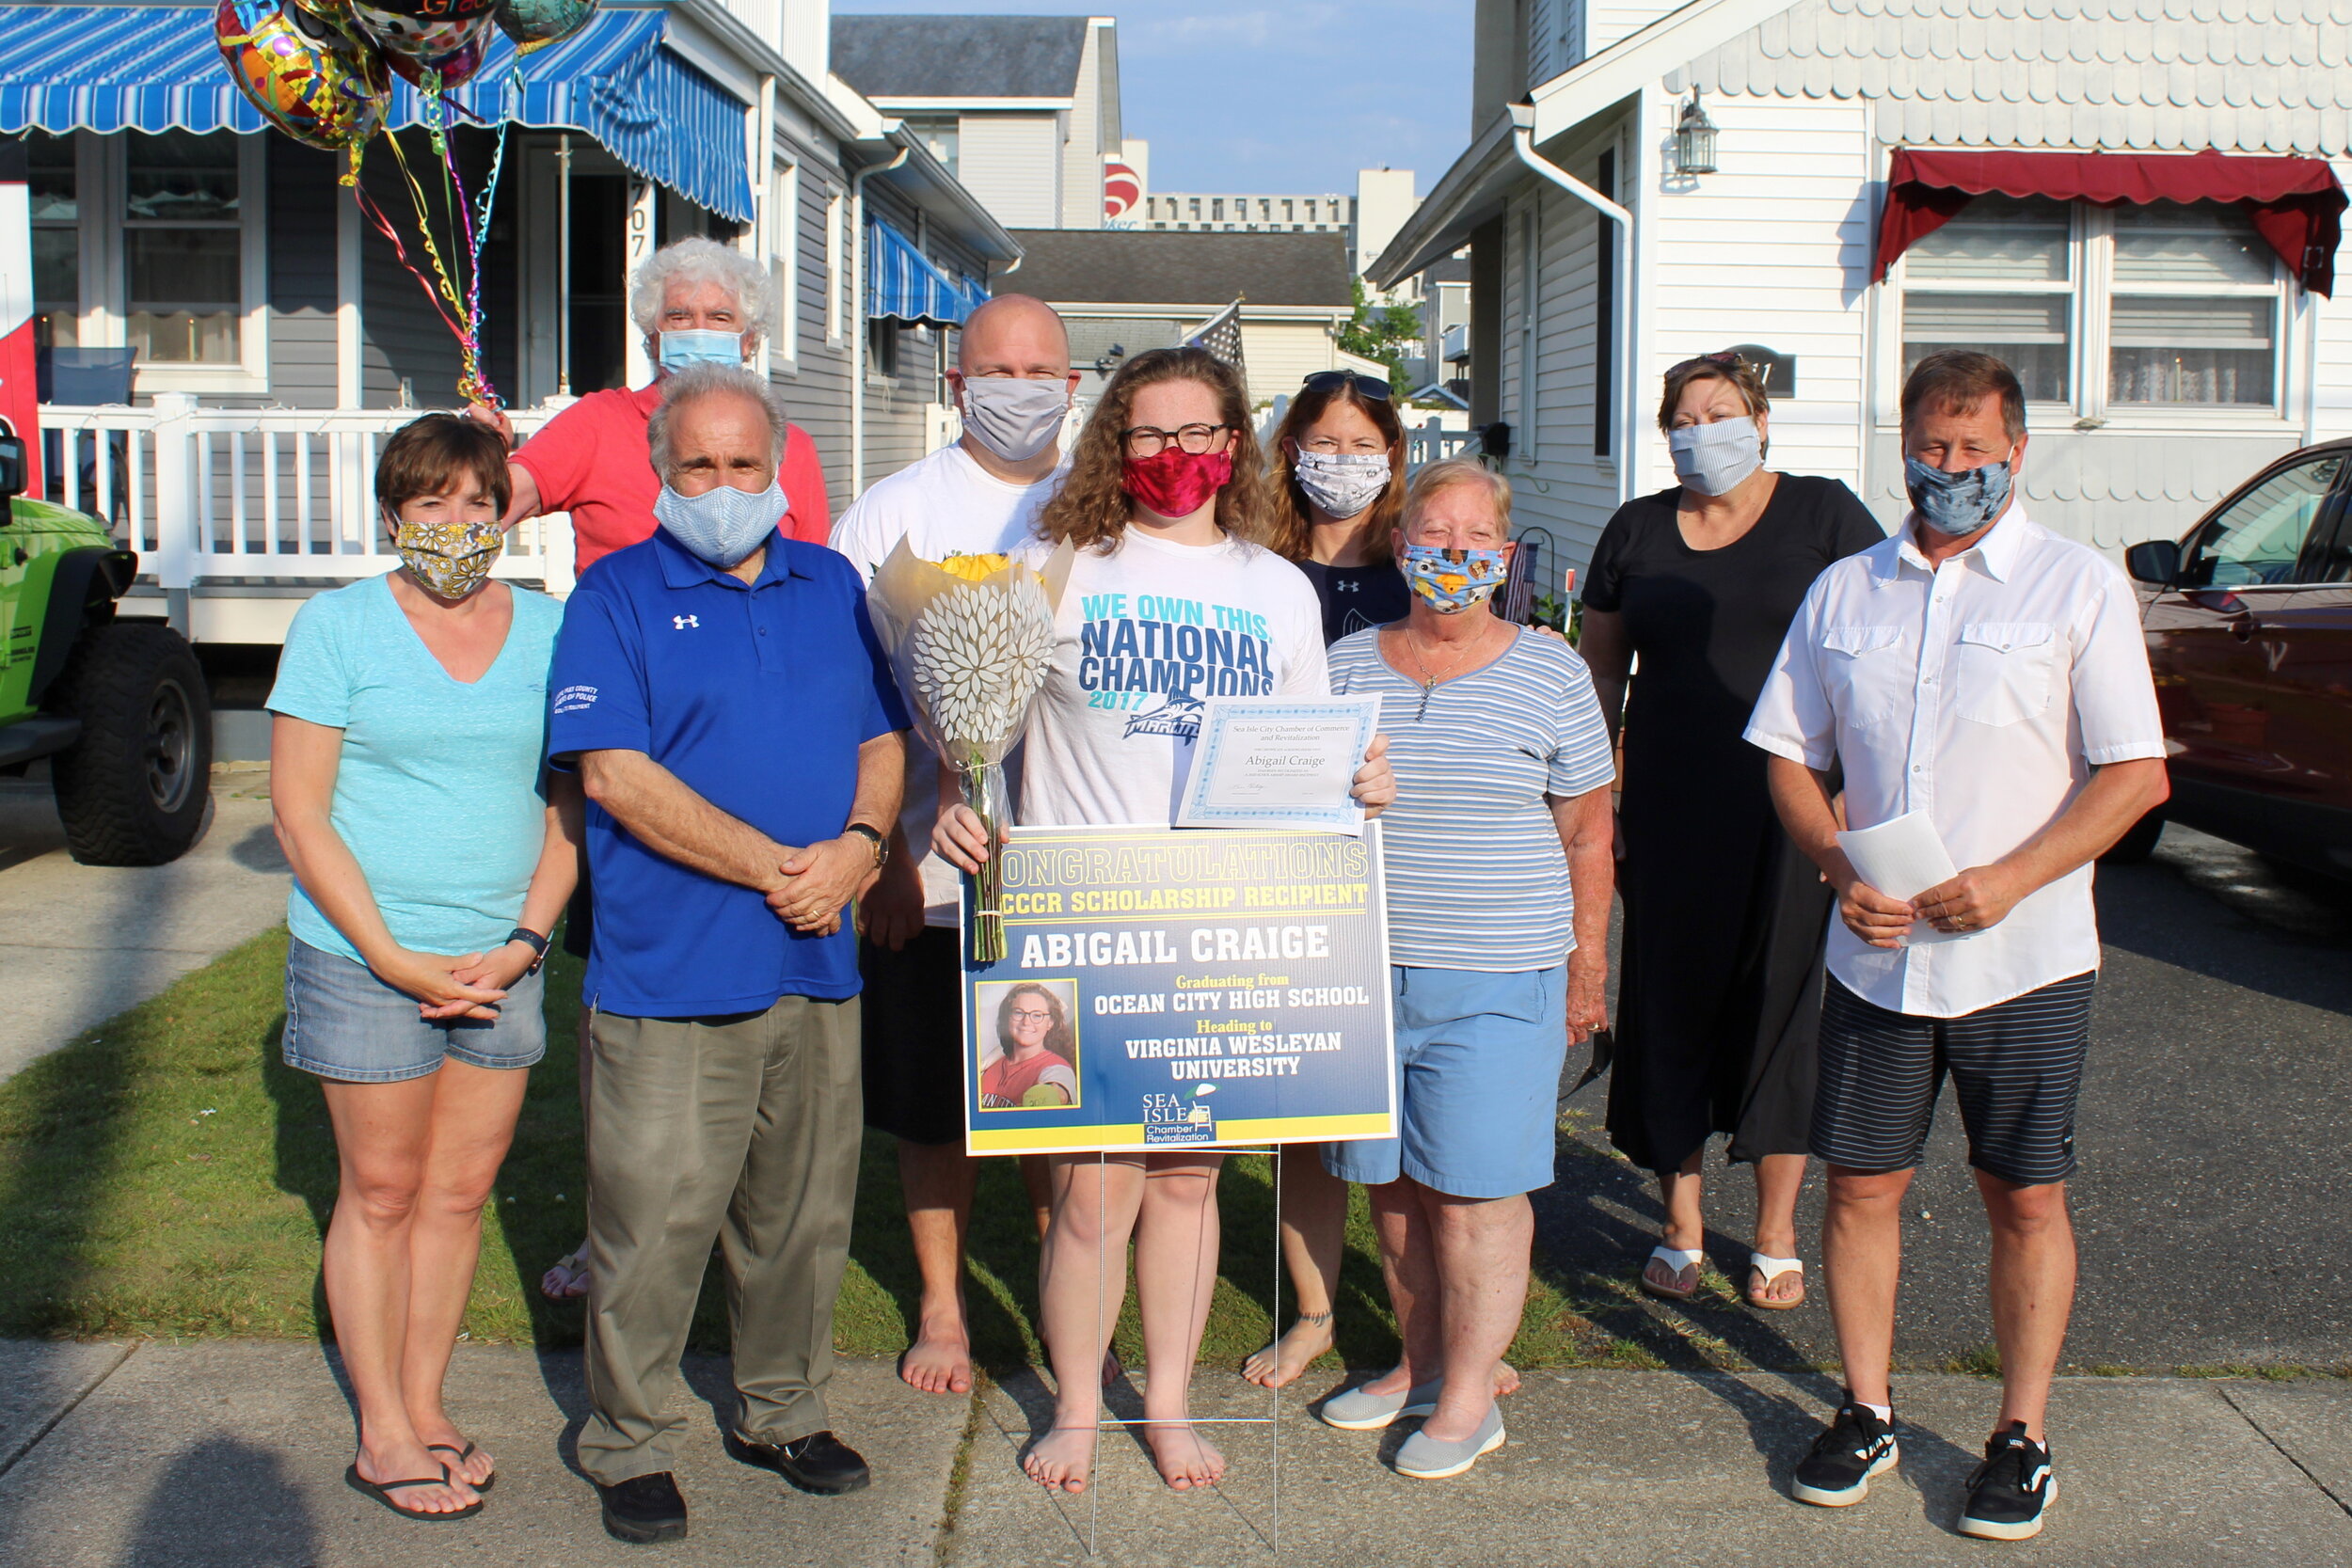  Abigail Craige poses with sign designating her as a recipient of a scholarship from the Sea Isle City Chamber of Commerce and Revitalization. She is surrounded by family members as well as Mayor Leonard Desiderio, SICCCR president Brian Heritage and